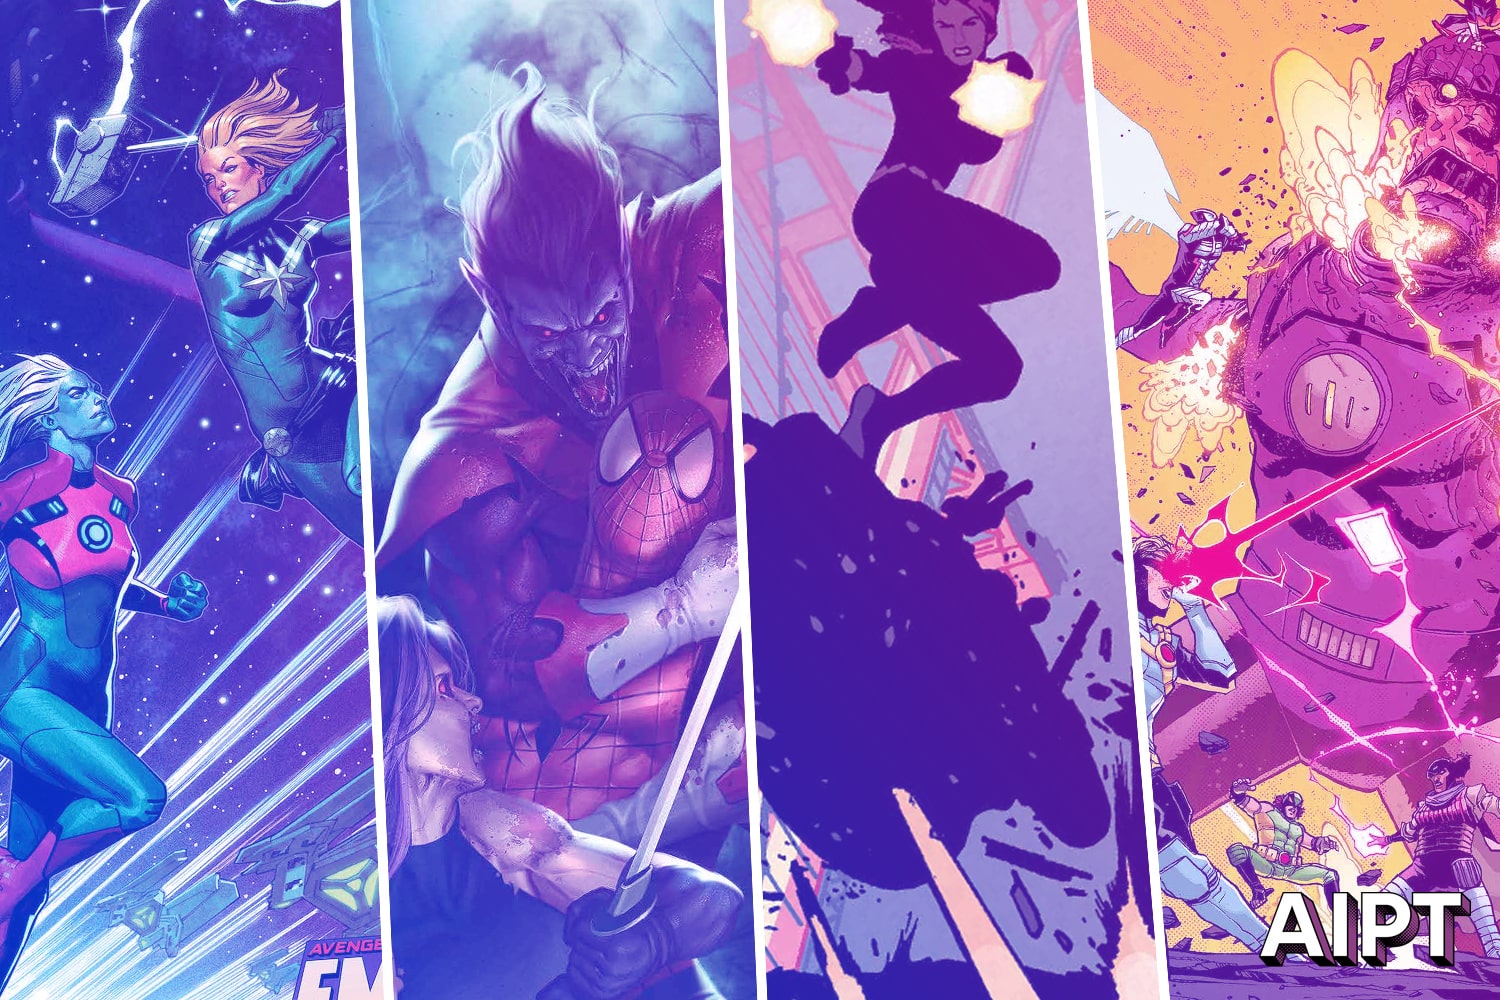 Marvel Comics’ May 2020 solicitations: Empyre spreads across Earth, X-Men fight plants, and more